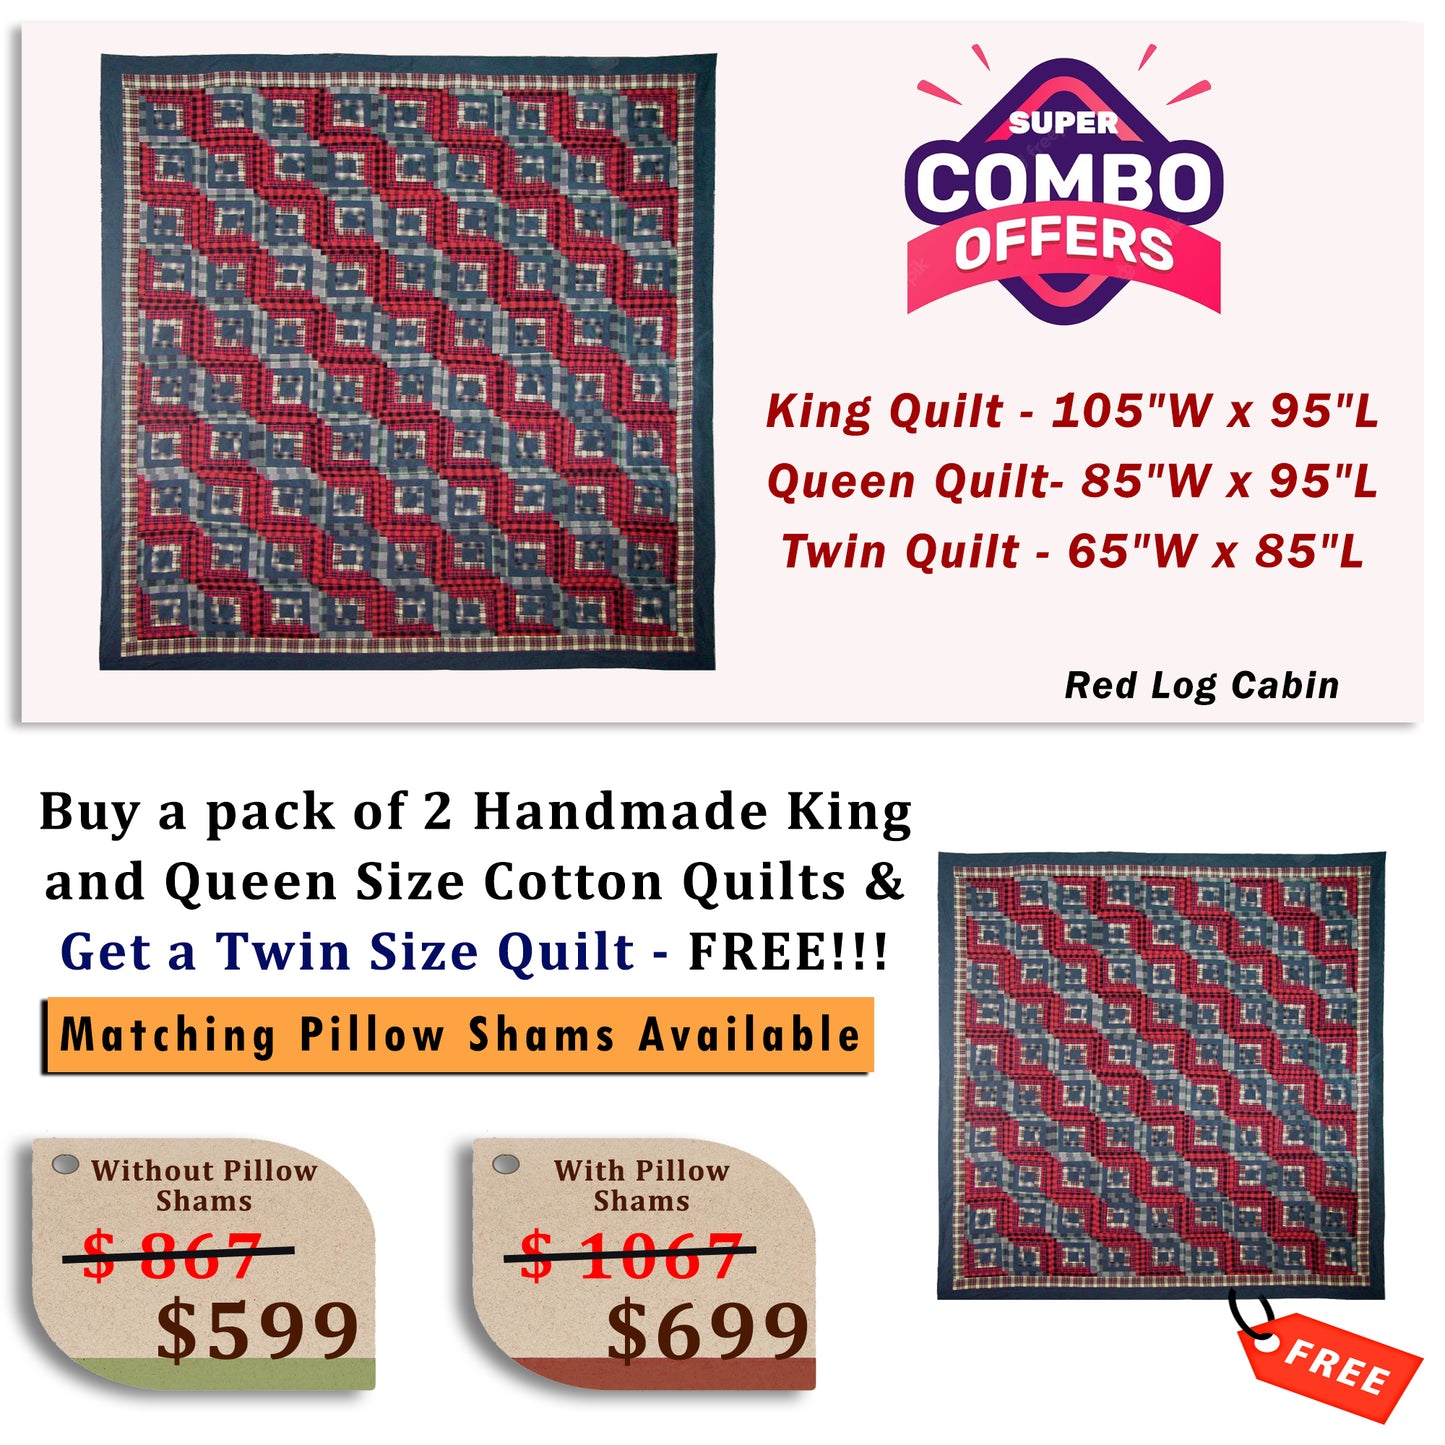 Red Log Cabin - Buy a pack of King and Queen Size Quilt, and get a Twin Size Quilt FREE!!!